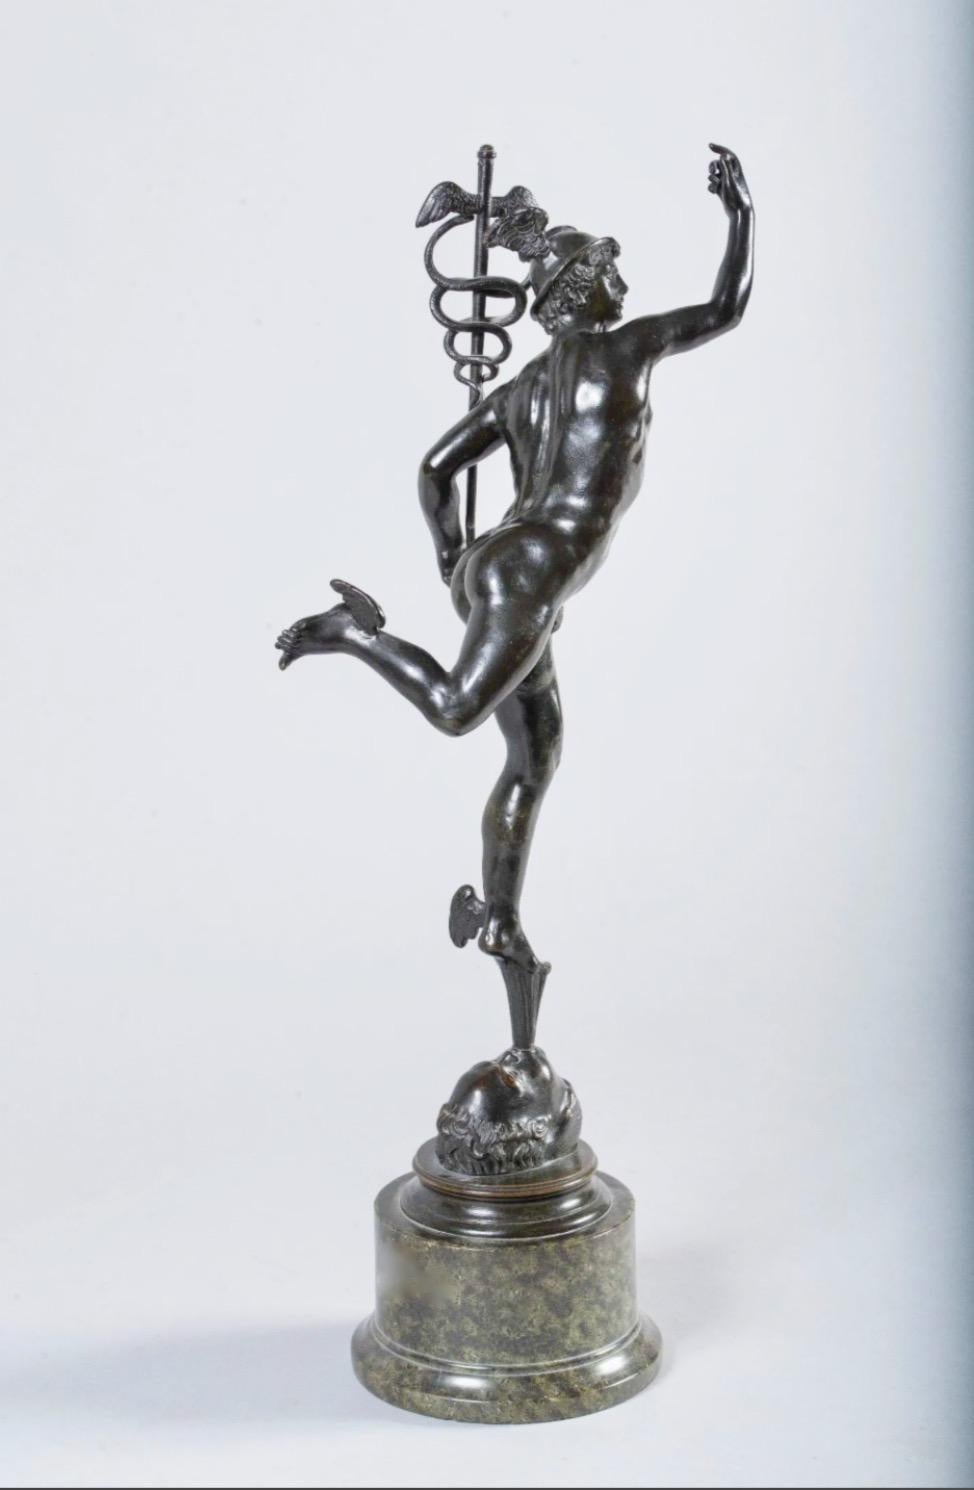 A fine Italian 19th century Grand Tour bronze sculpture of Mercury, also called Mercurius. The bronze have a nice old patina and is in god condition. It is mounted on a round marble base with a grey/greenish color. 
The model of Mercury is after the